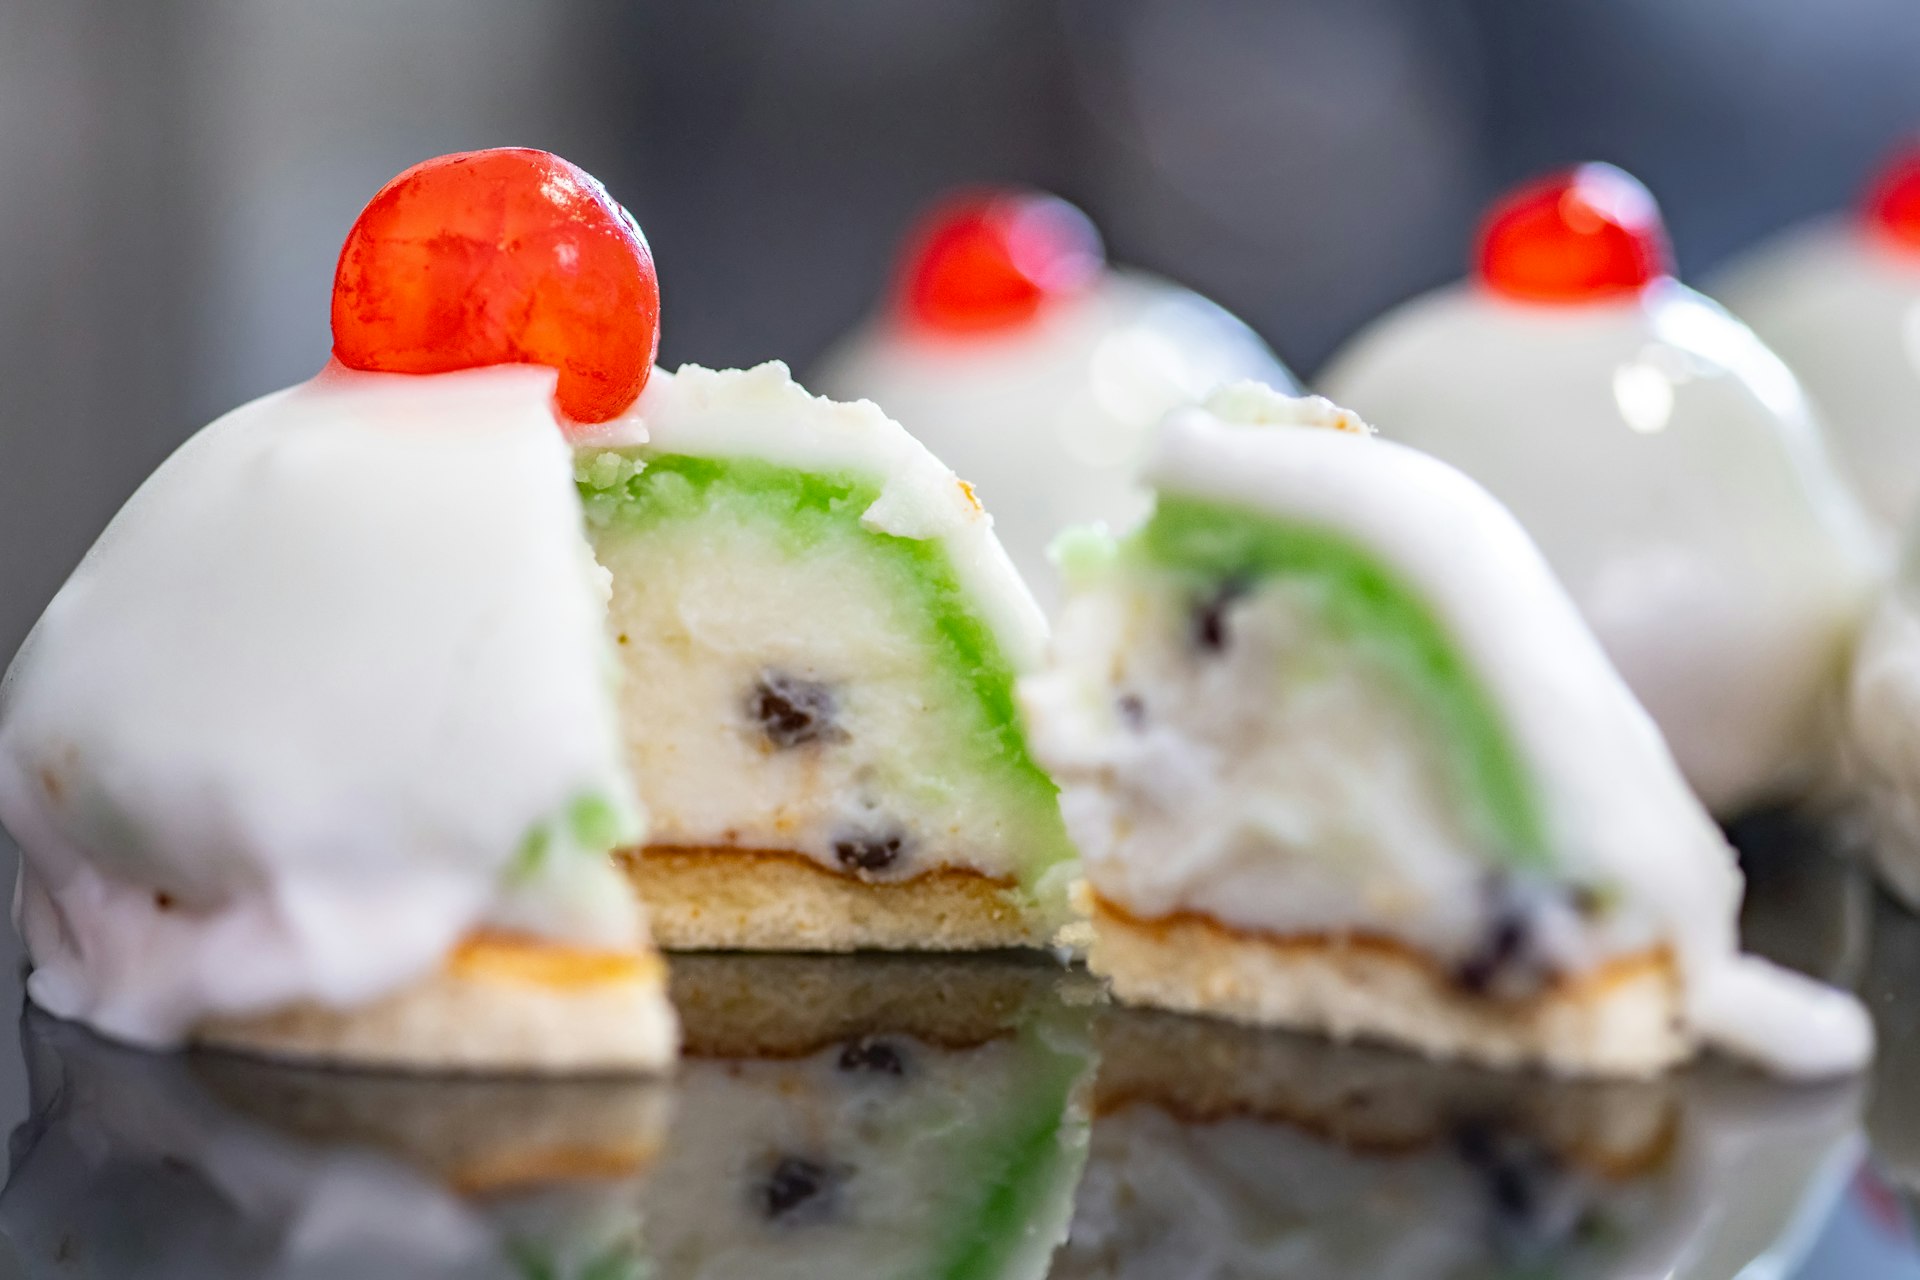 Cross-section of a Sicilian cassata, a sweet dessert cake made with ricotta, vanilla, pea-green icing and candied fruit